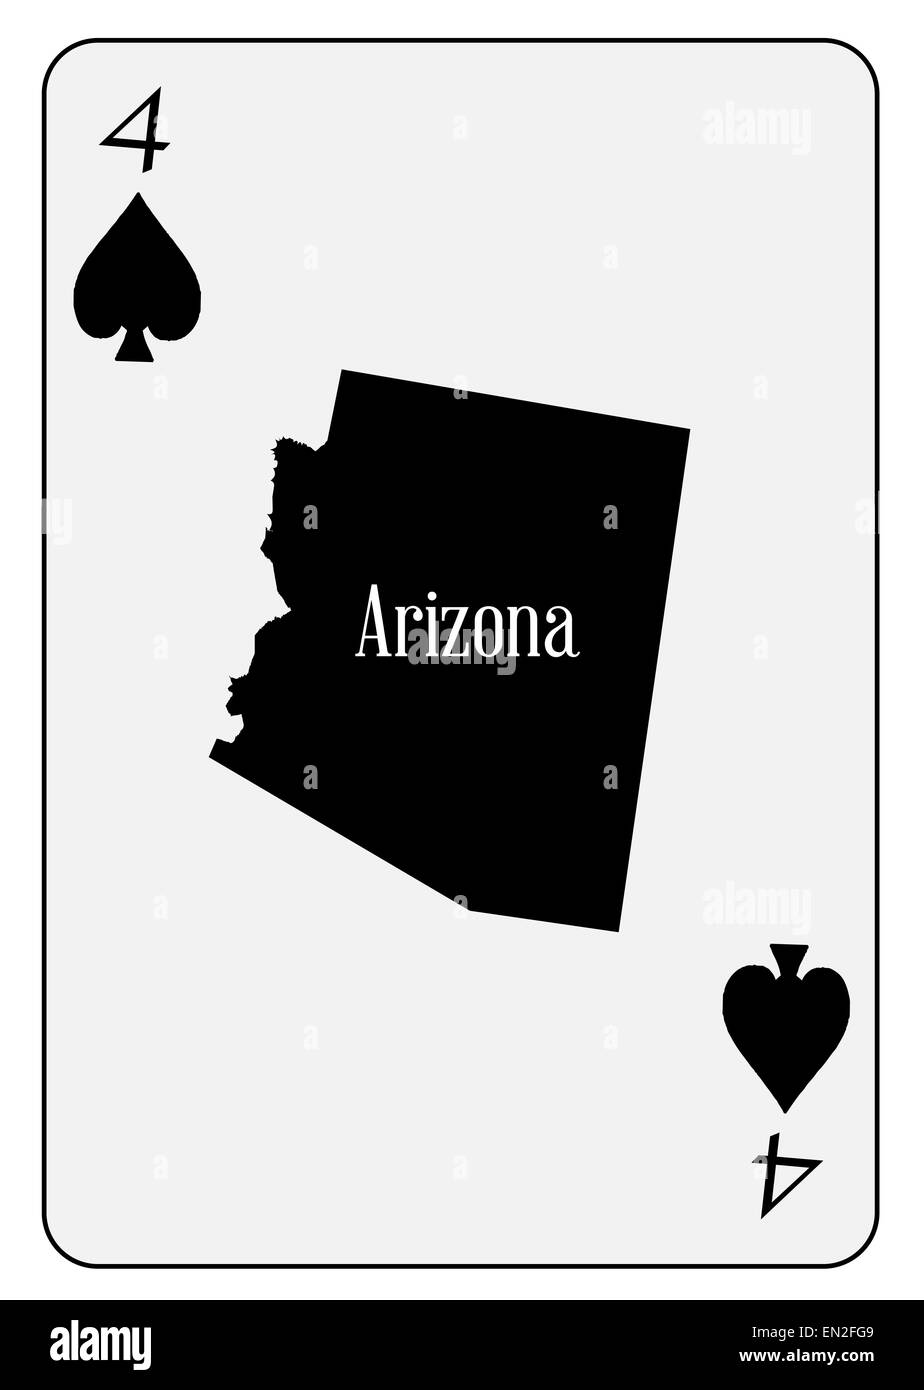 Outline map of the state of Arizona and used as the 4 of Spades motif in a playing card Stock Photo